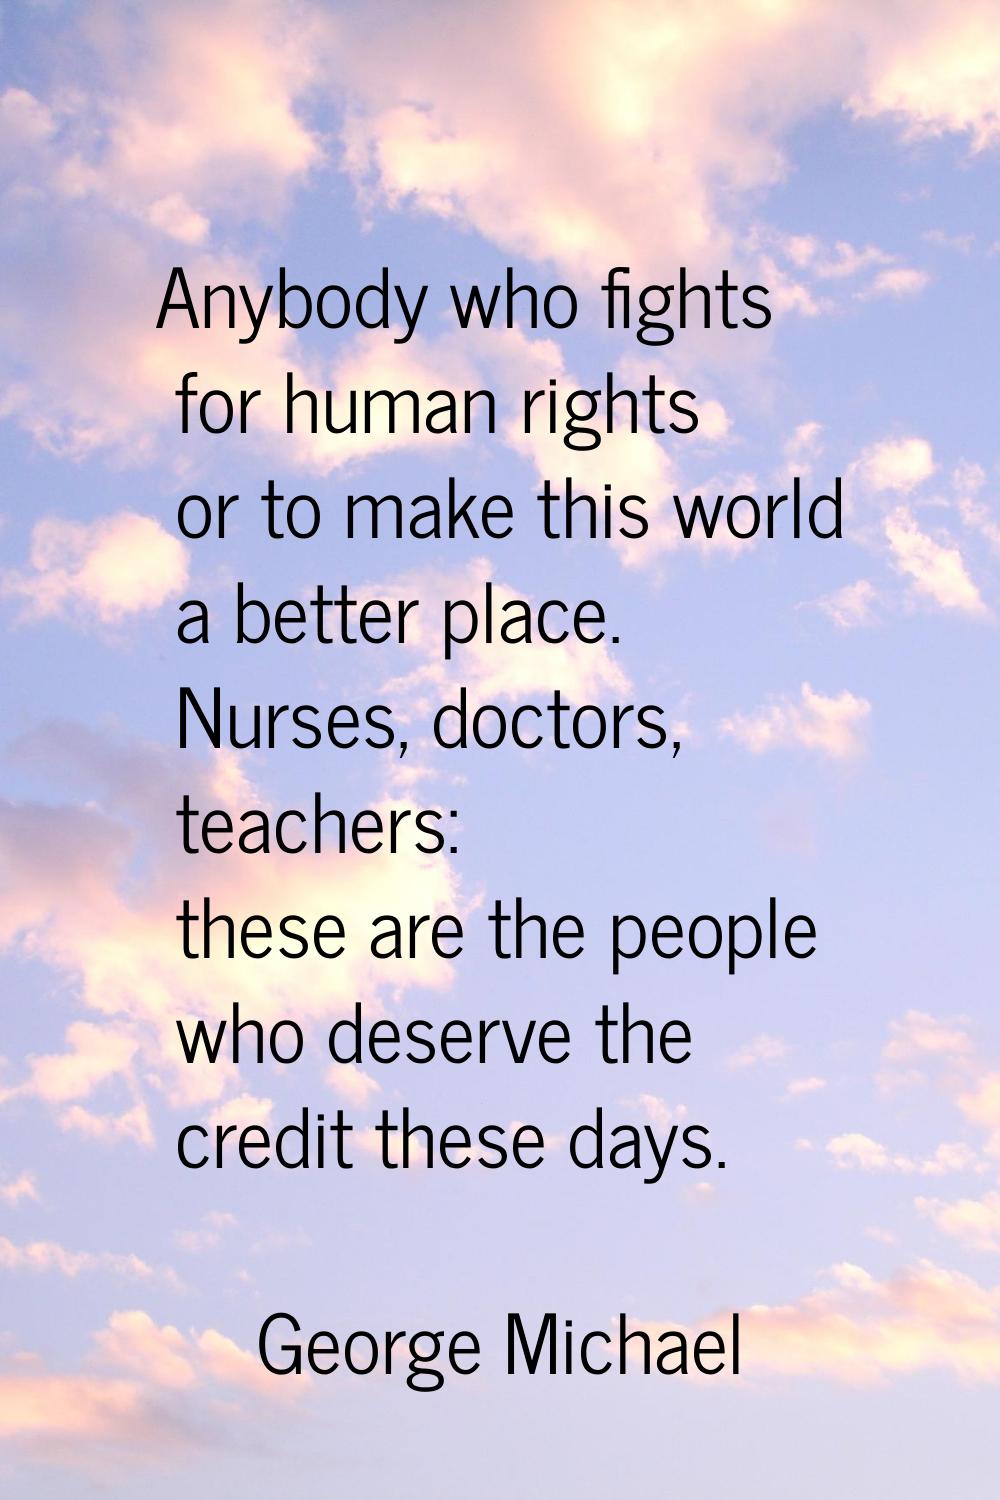 Anybody who fights for human rights or to make this world a better place. Nurses, doctors, teachers